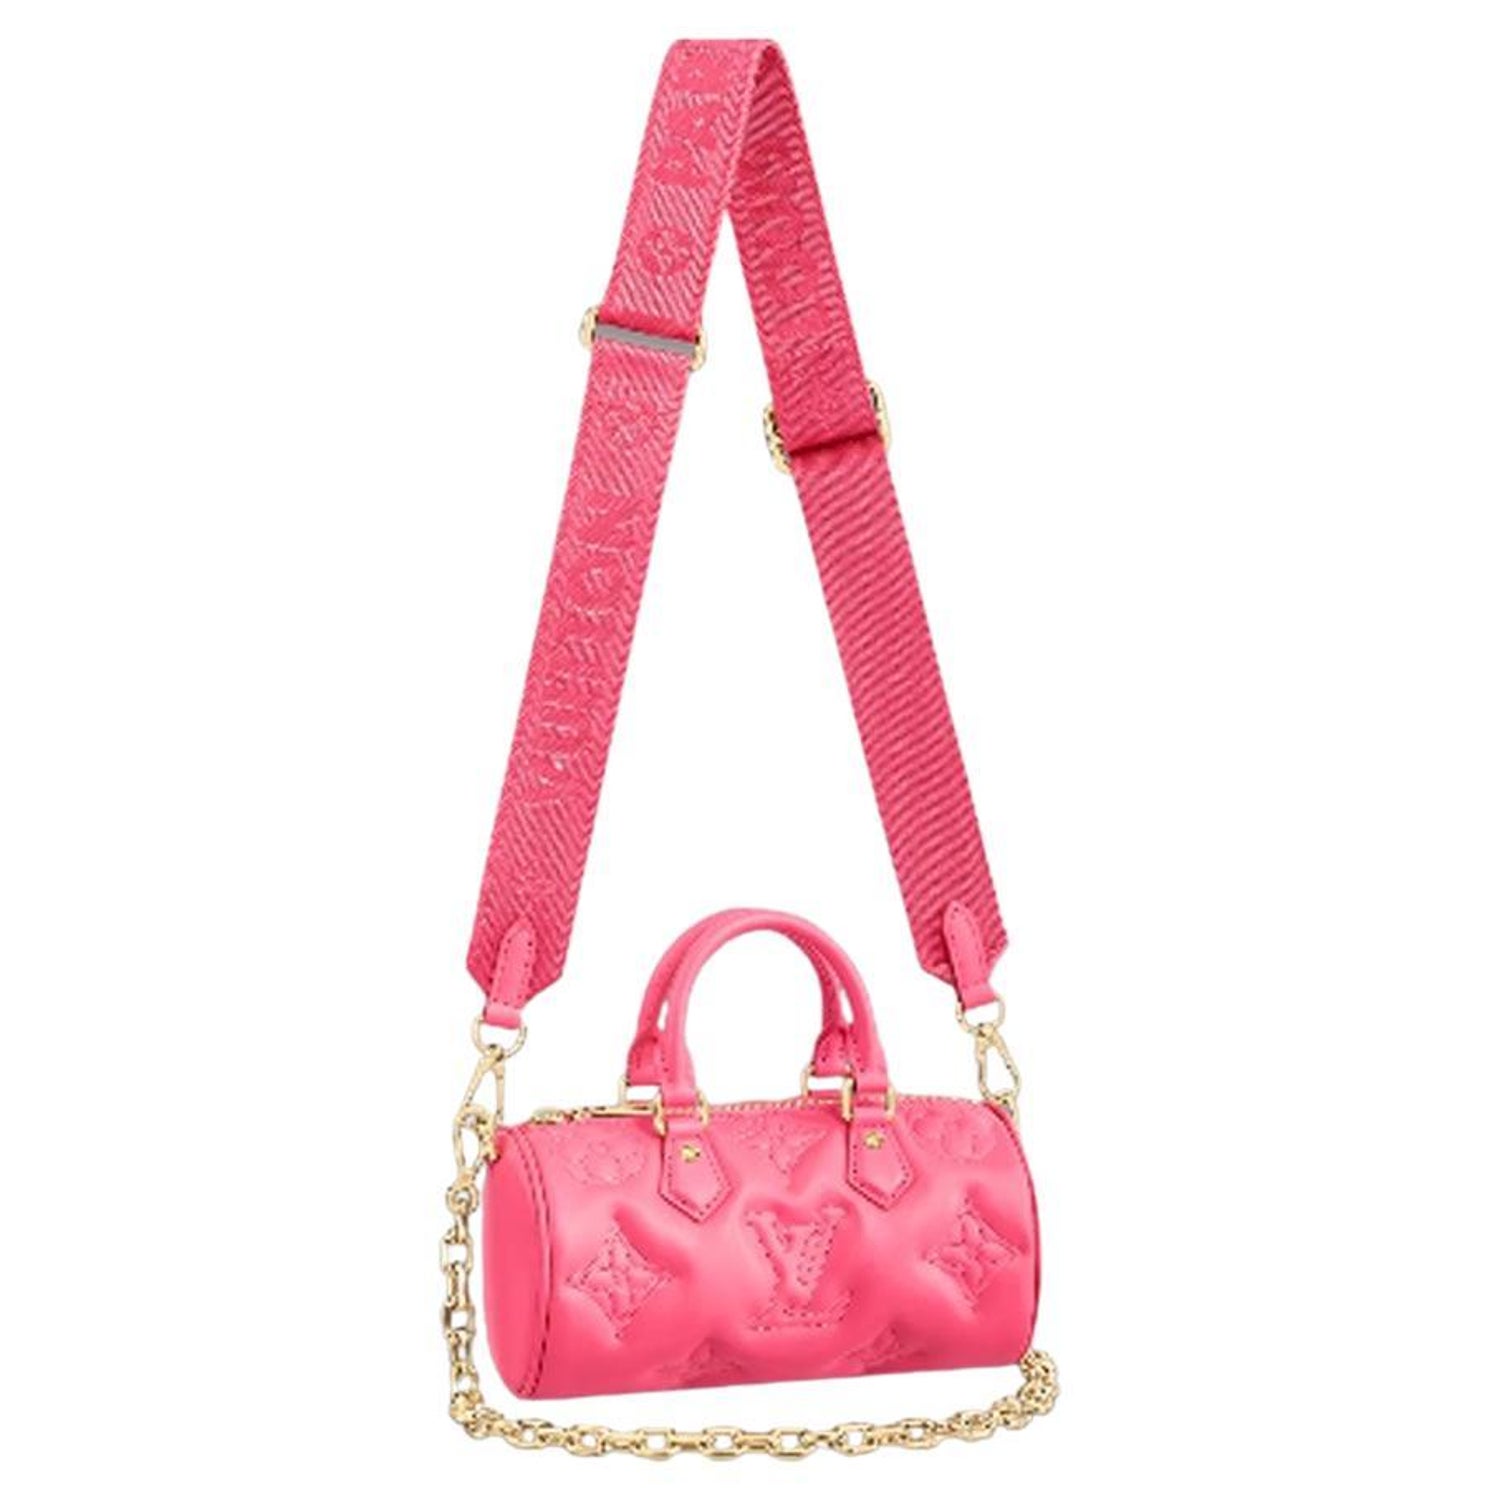 Louis Vuitton - Authenticated Papillon Bb Handbag - Leather Pink for Women, Very Good Condition